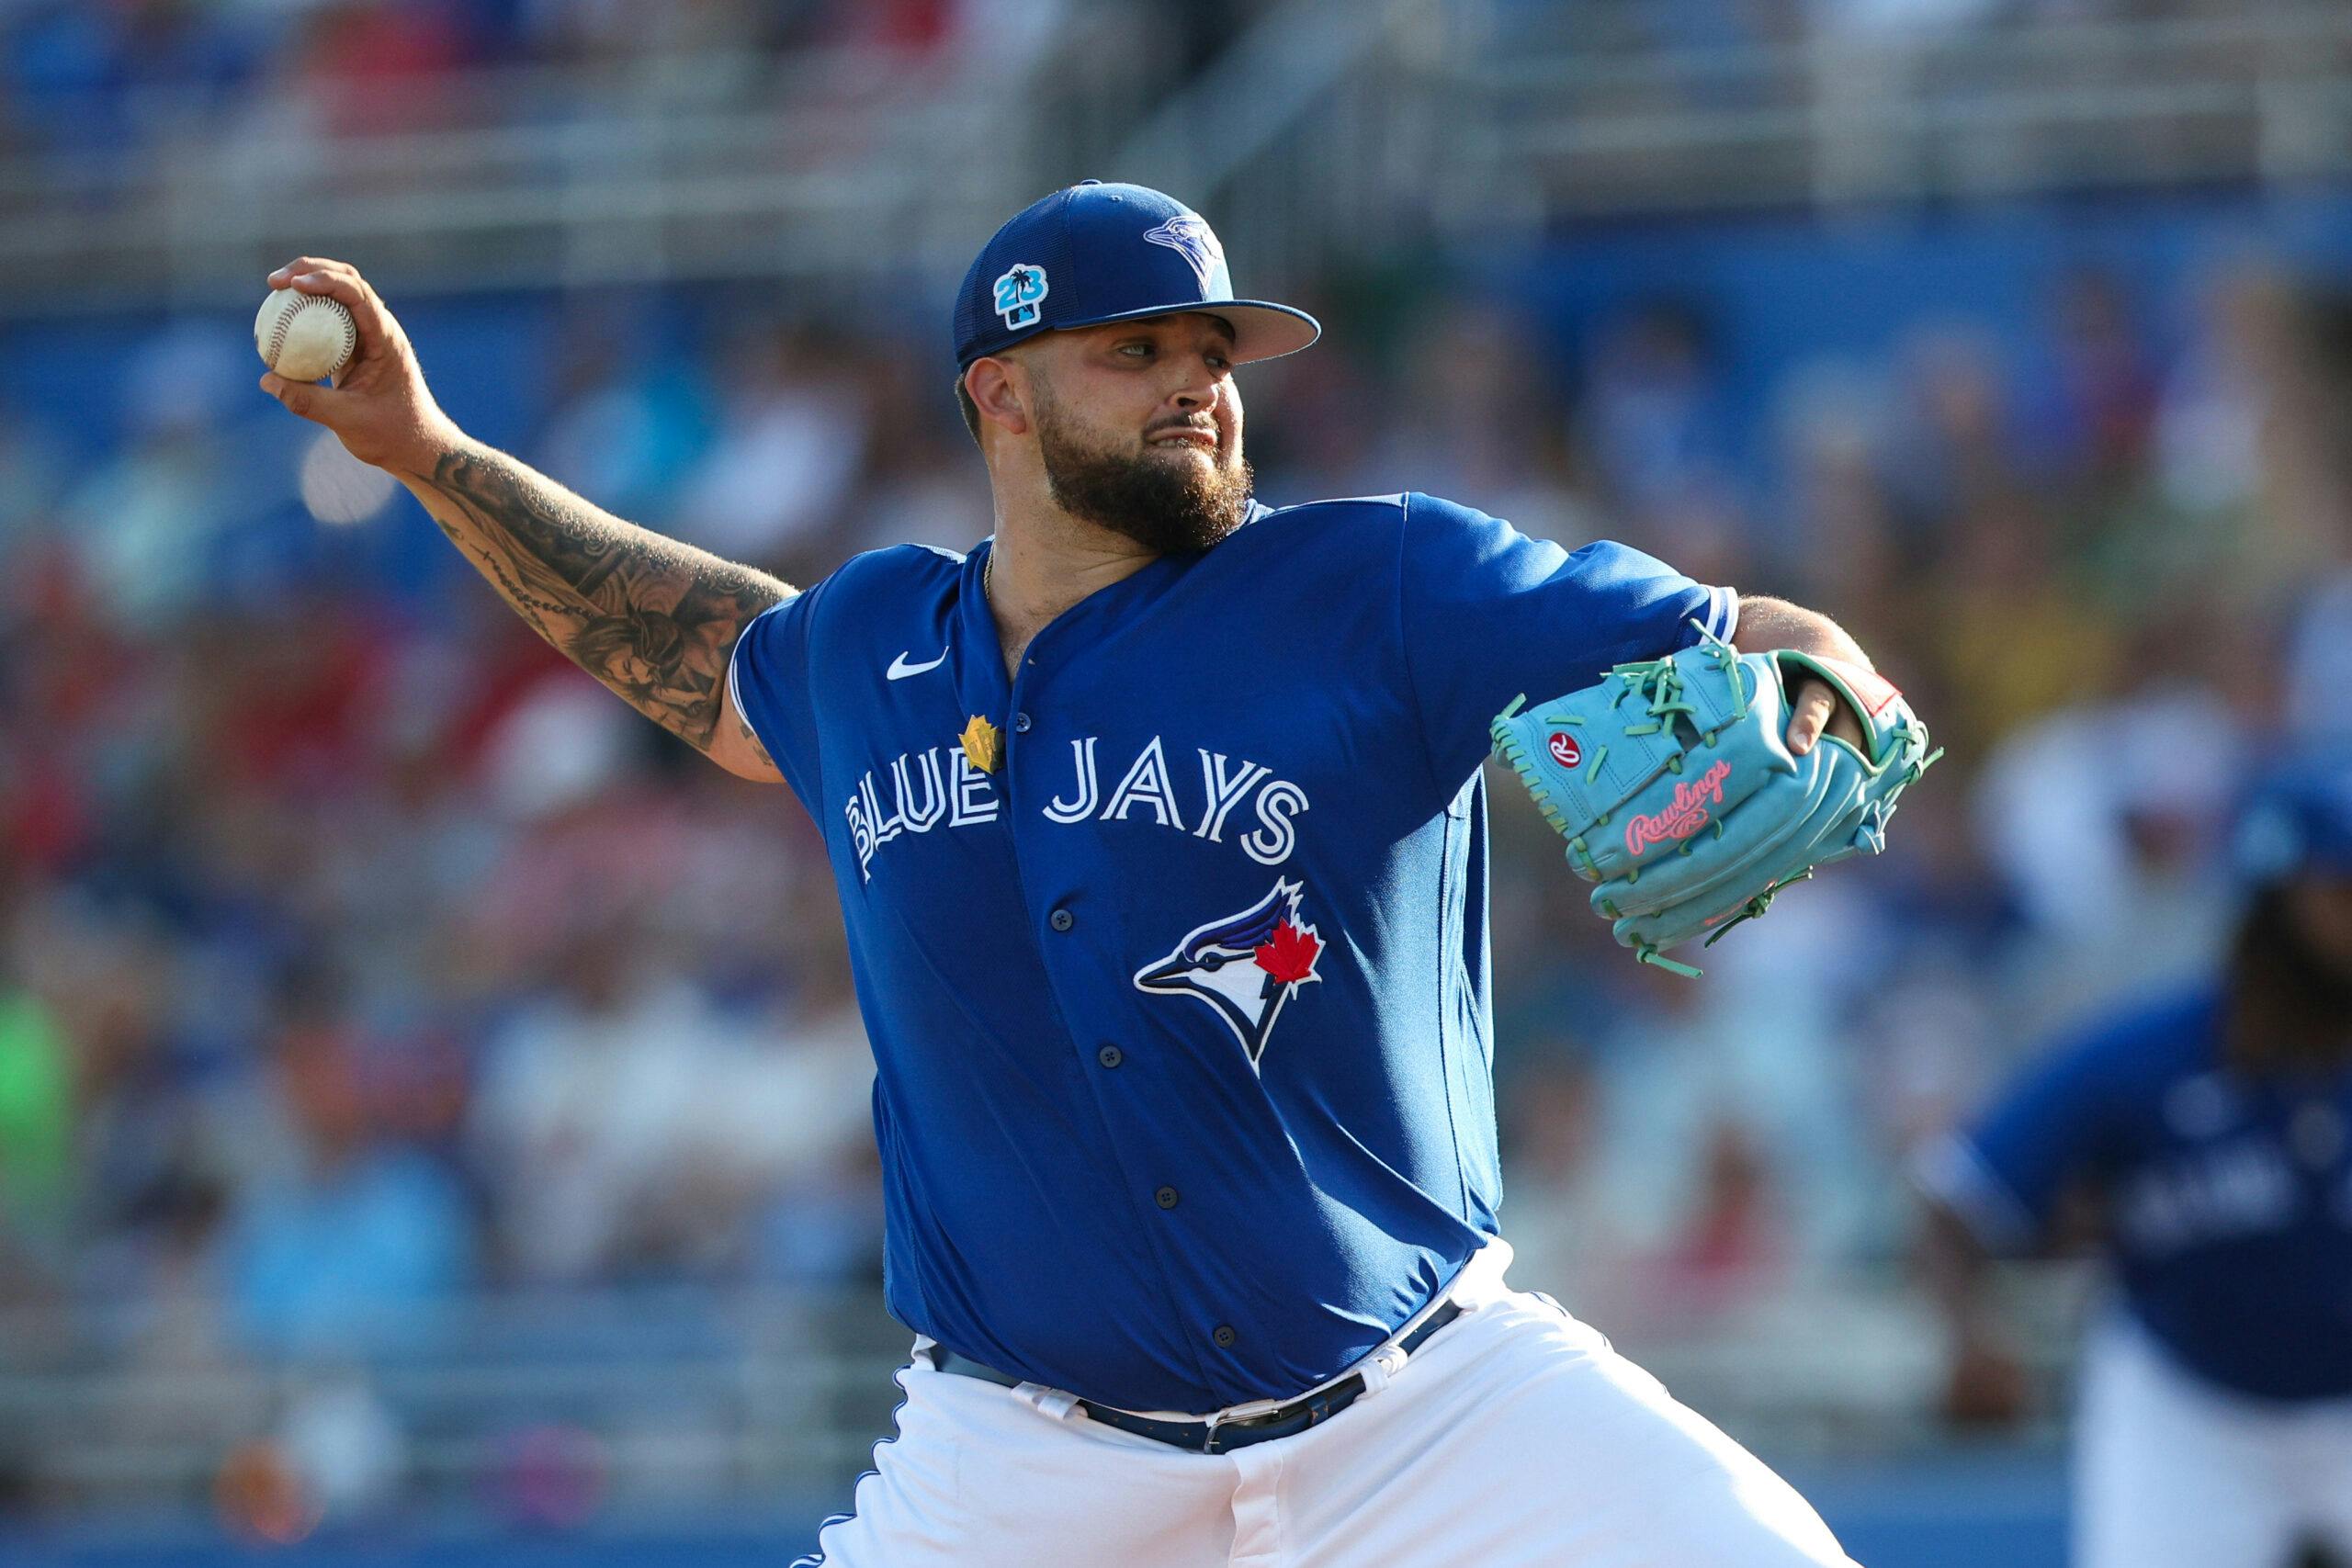 Toronto Blue Jays: Alek Manoah potential on display with dominant outing